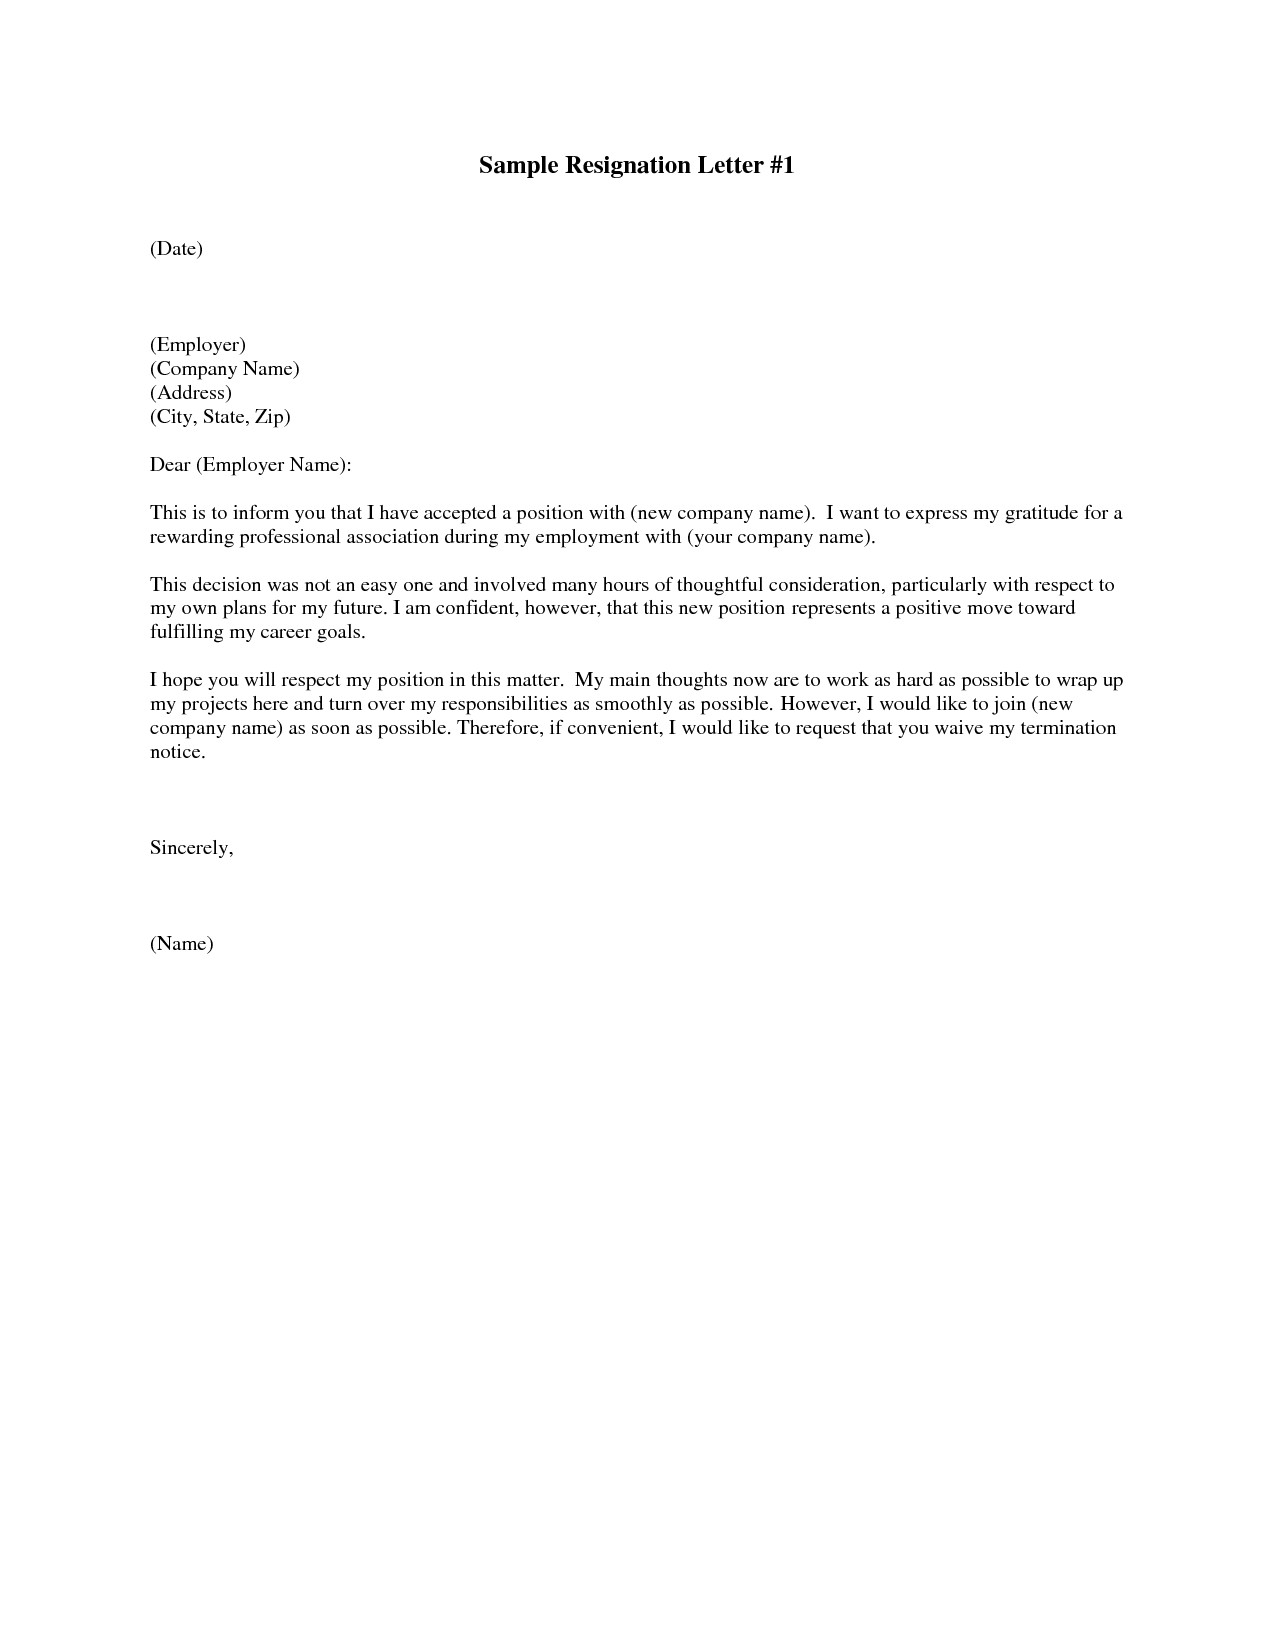 How to Write Easy Simple Resignation Letter Sample